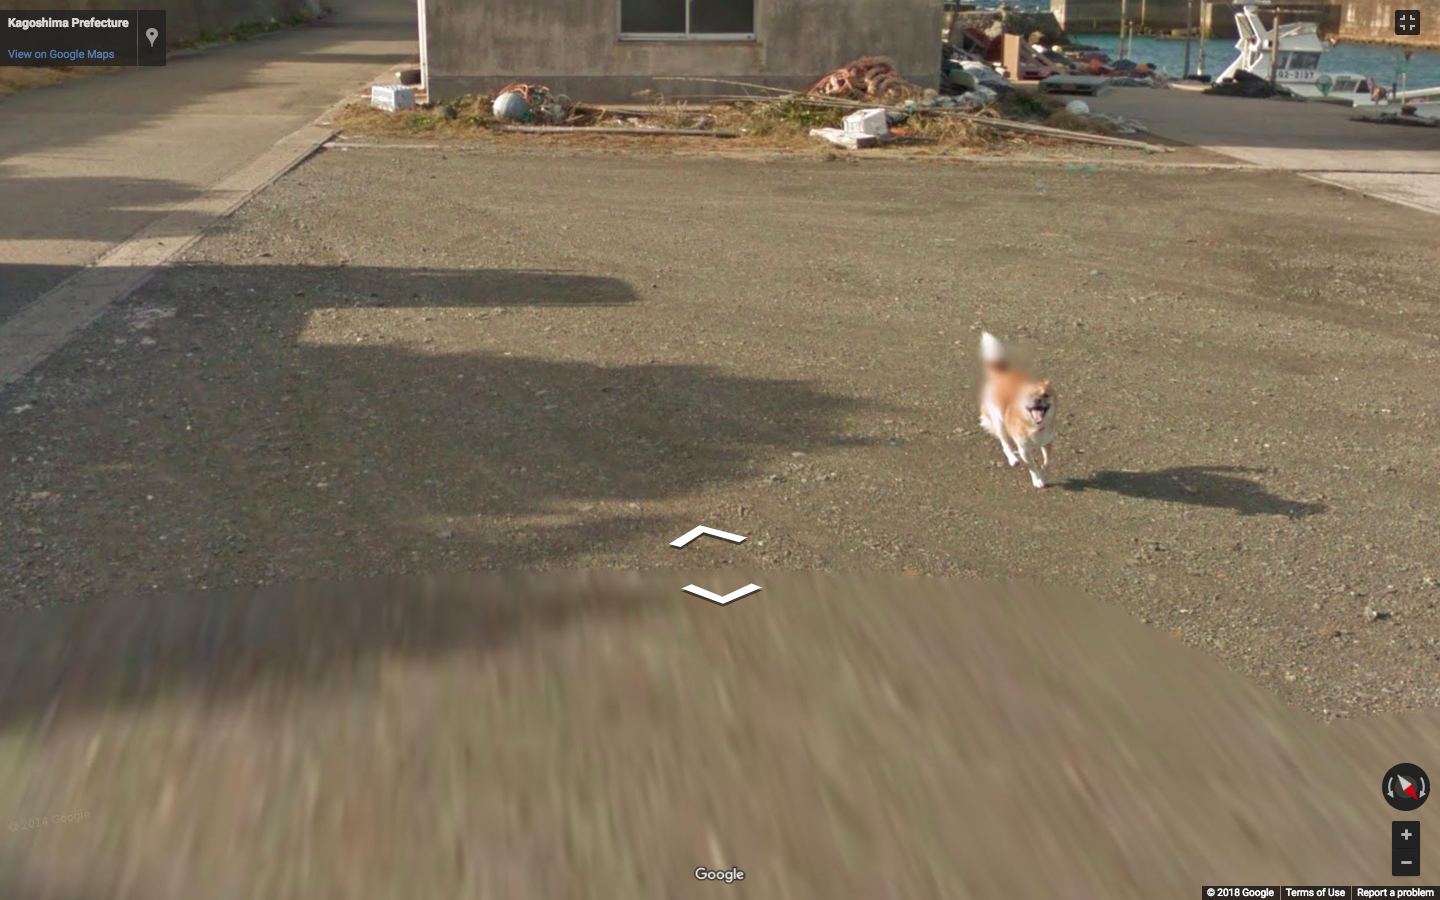 This Dog Chasing A Google Street View Car Is So Cute I Could Die